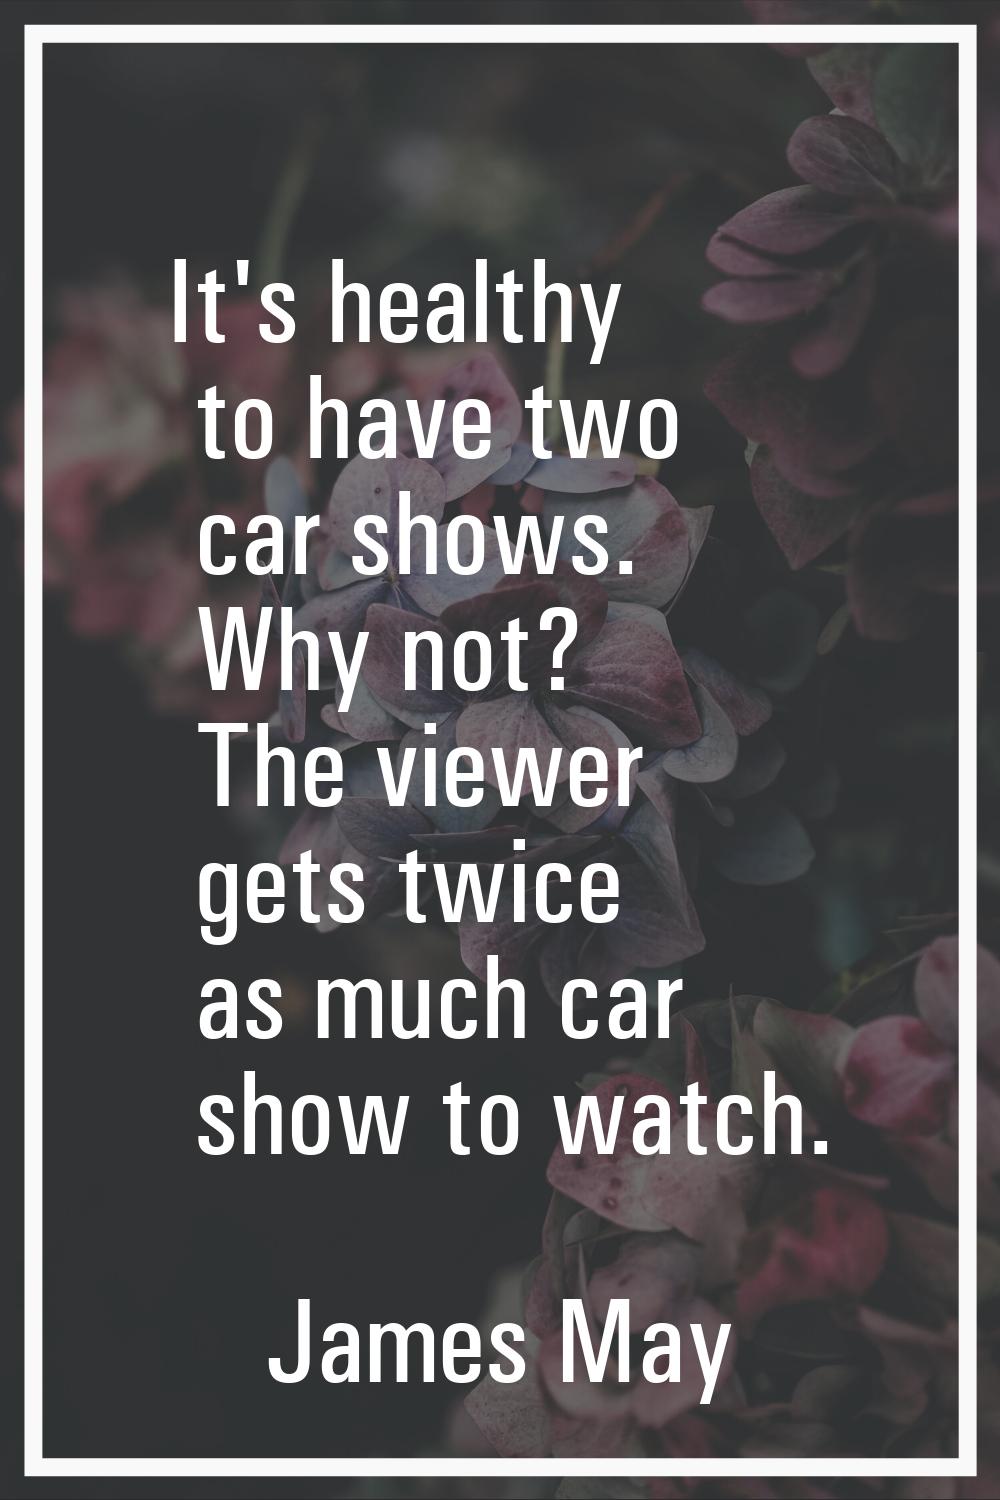 It's healthy to have two car shows. Why not? The viewer gets twice as much car show to watch.